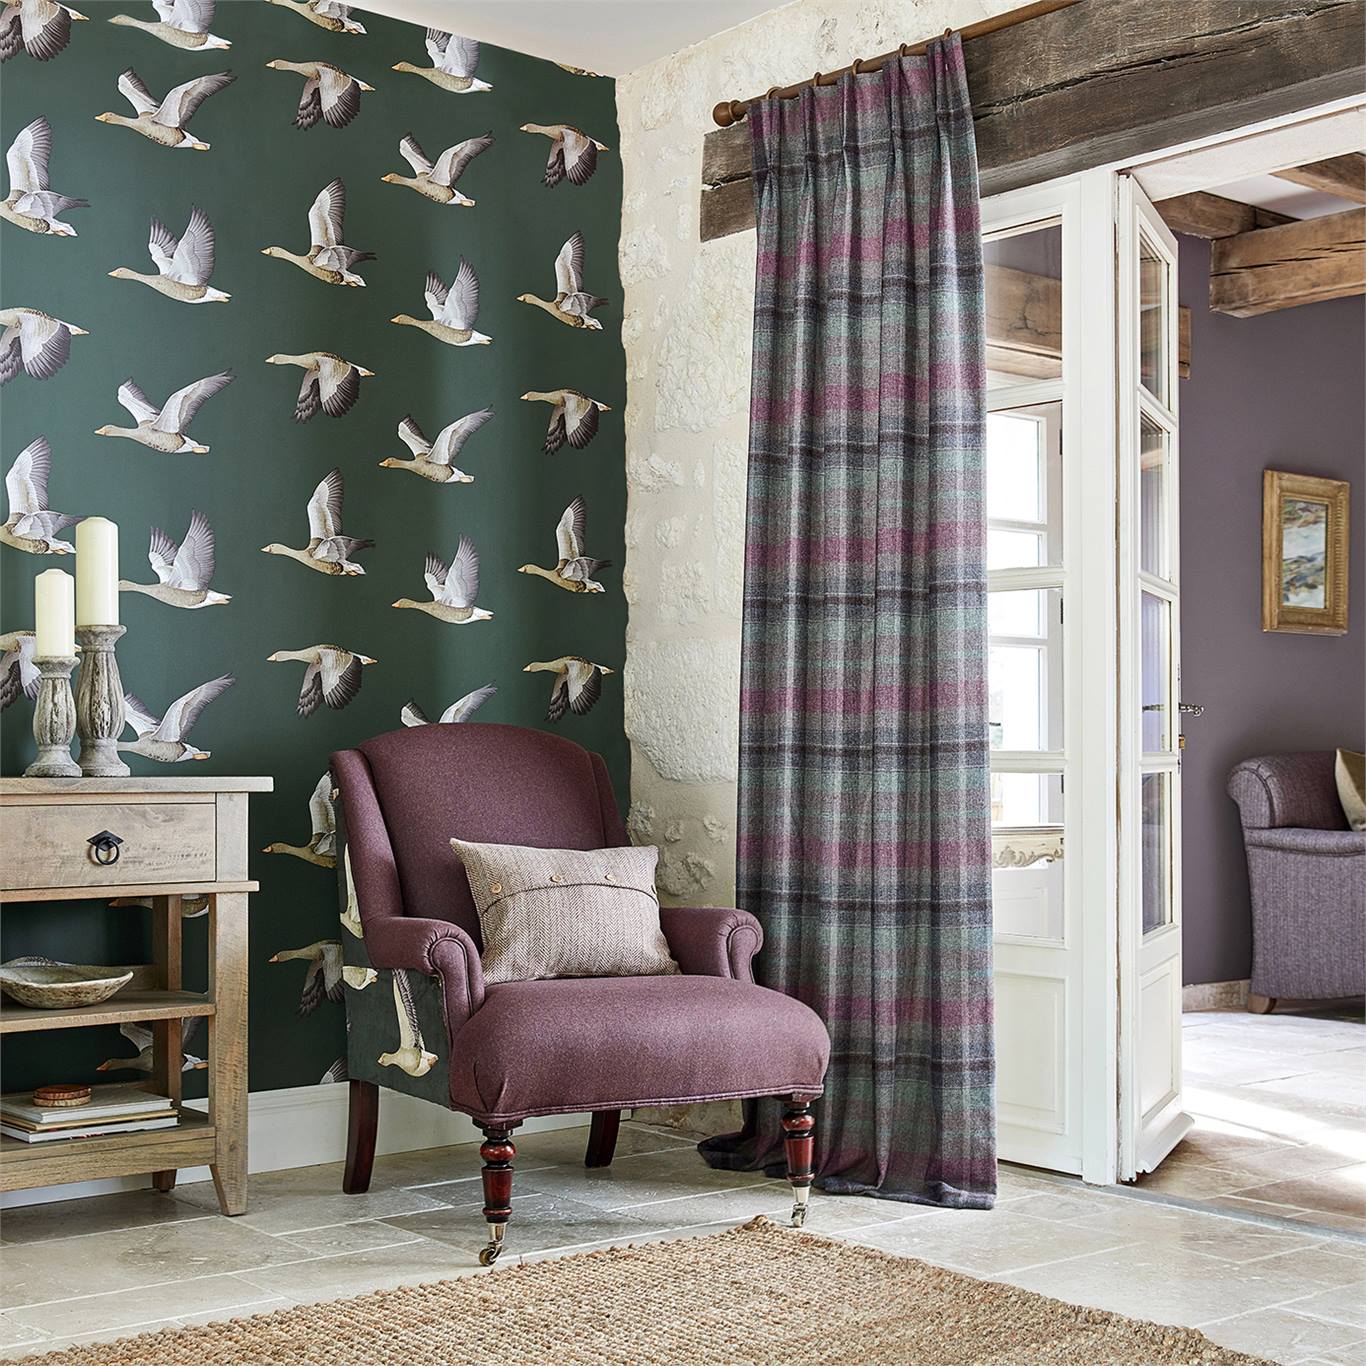 Bryndle Check, A Fabric By Sanderson, Part Of The Islay - Sanderson Elysian Wallpaper Geese - HD Wallpaper 